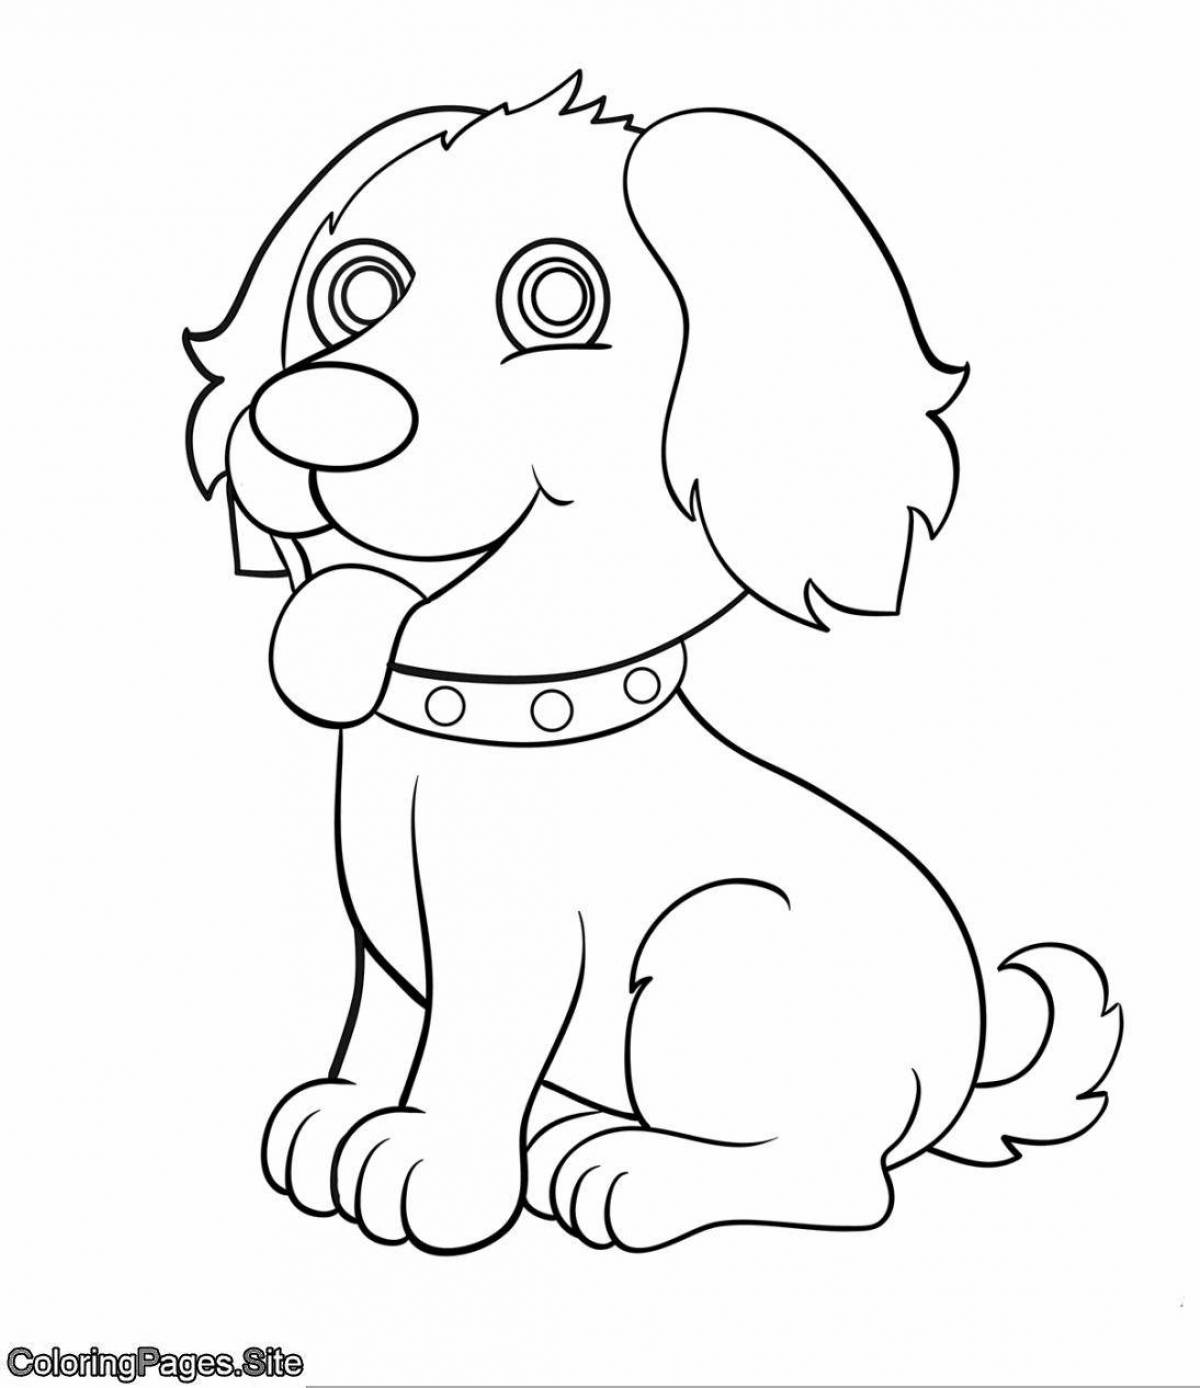 Snuggly coloring page рисунок щенка